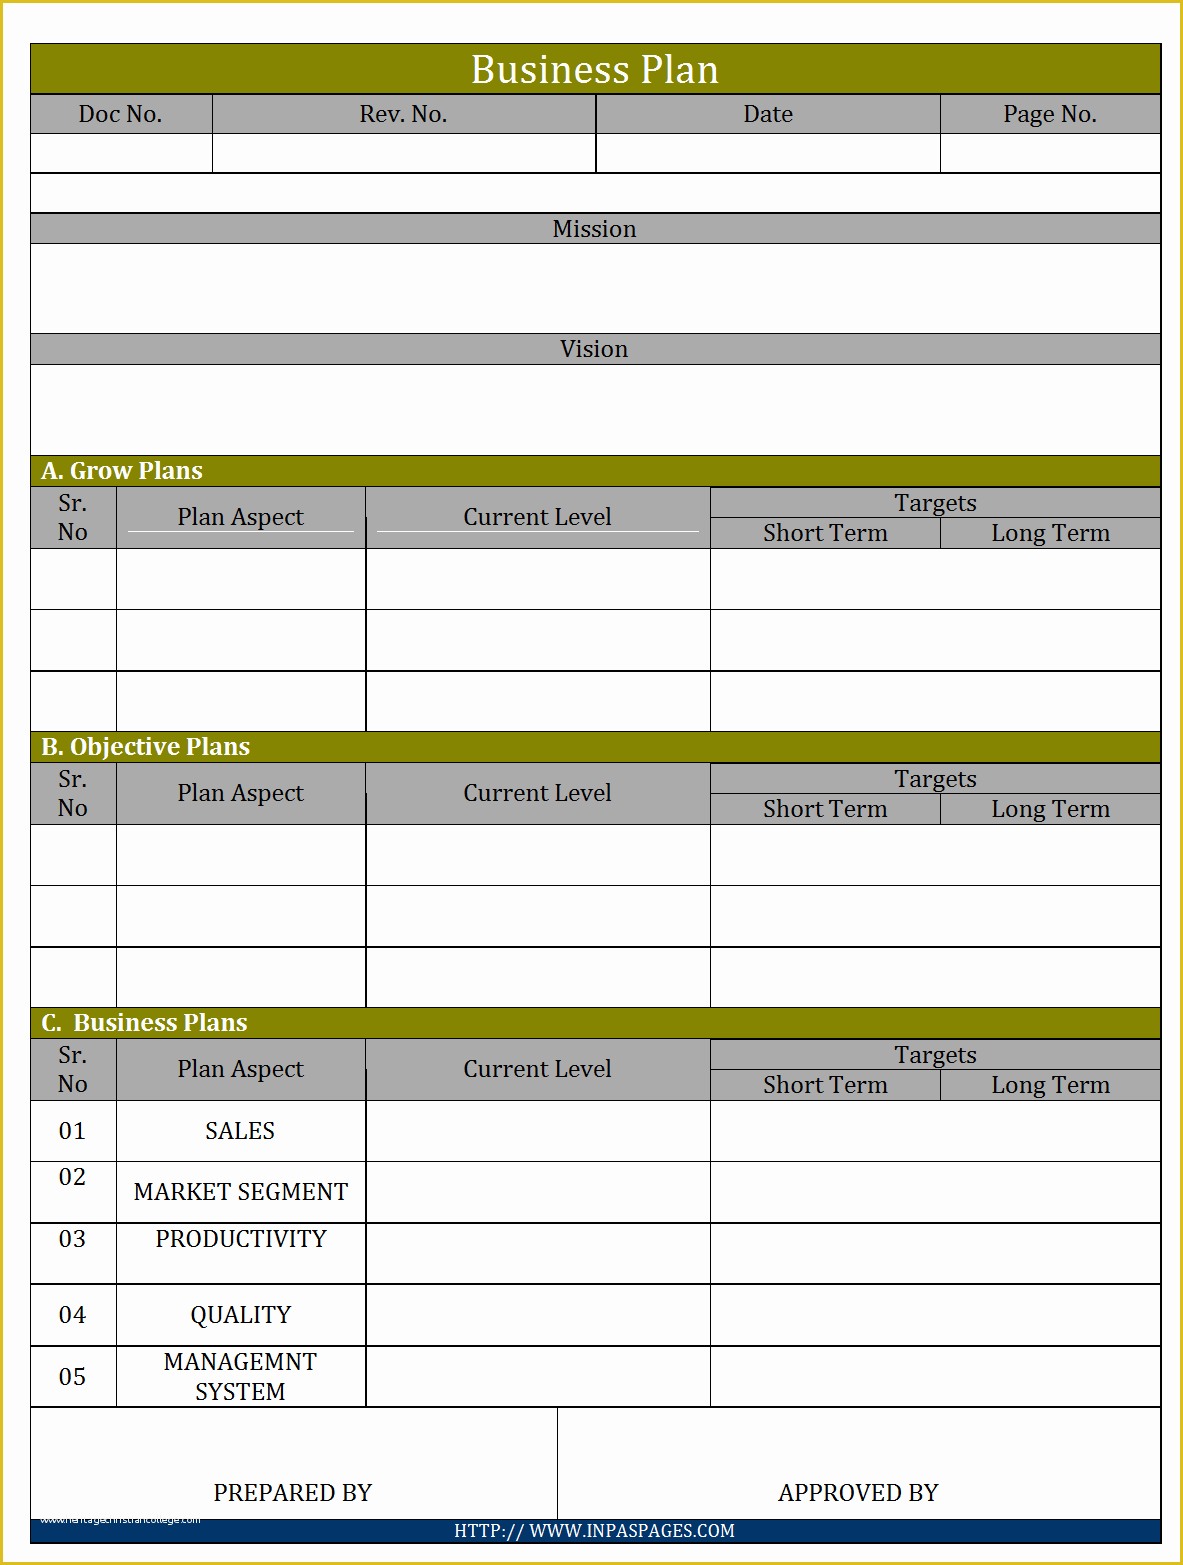 Business Plan Template Free Download Of Business Plan Template Pdf Free Download